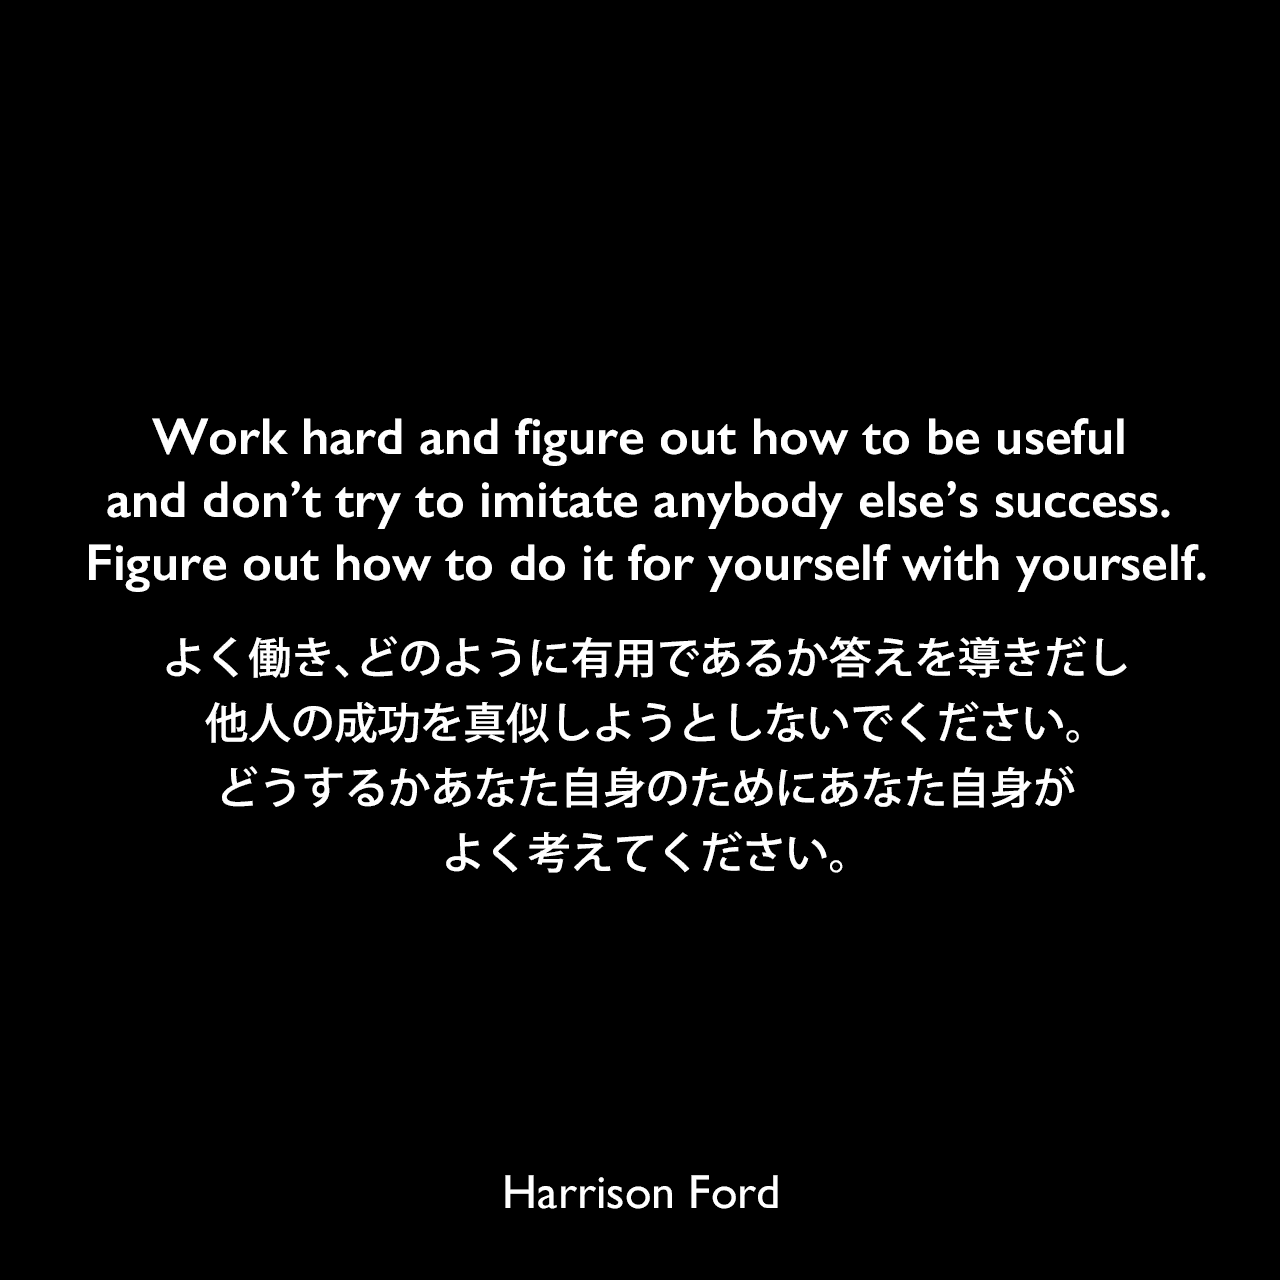 Work hard and figure out how to be useful and don’t try to imitate anybody else’s success. Figure out how to do it for yourself with yourself.よく働き、どのように有用であるか答えを導きだし、他人の成功を真似しようとしないでください。どうするかあなた自身のためにあなた自身が、よく考えてください。Harrison Ford